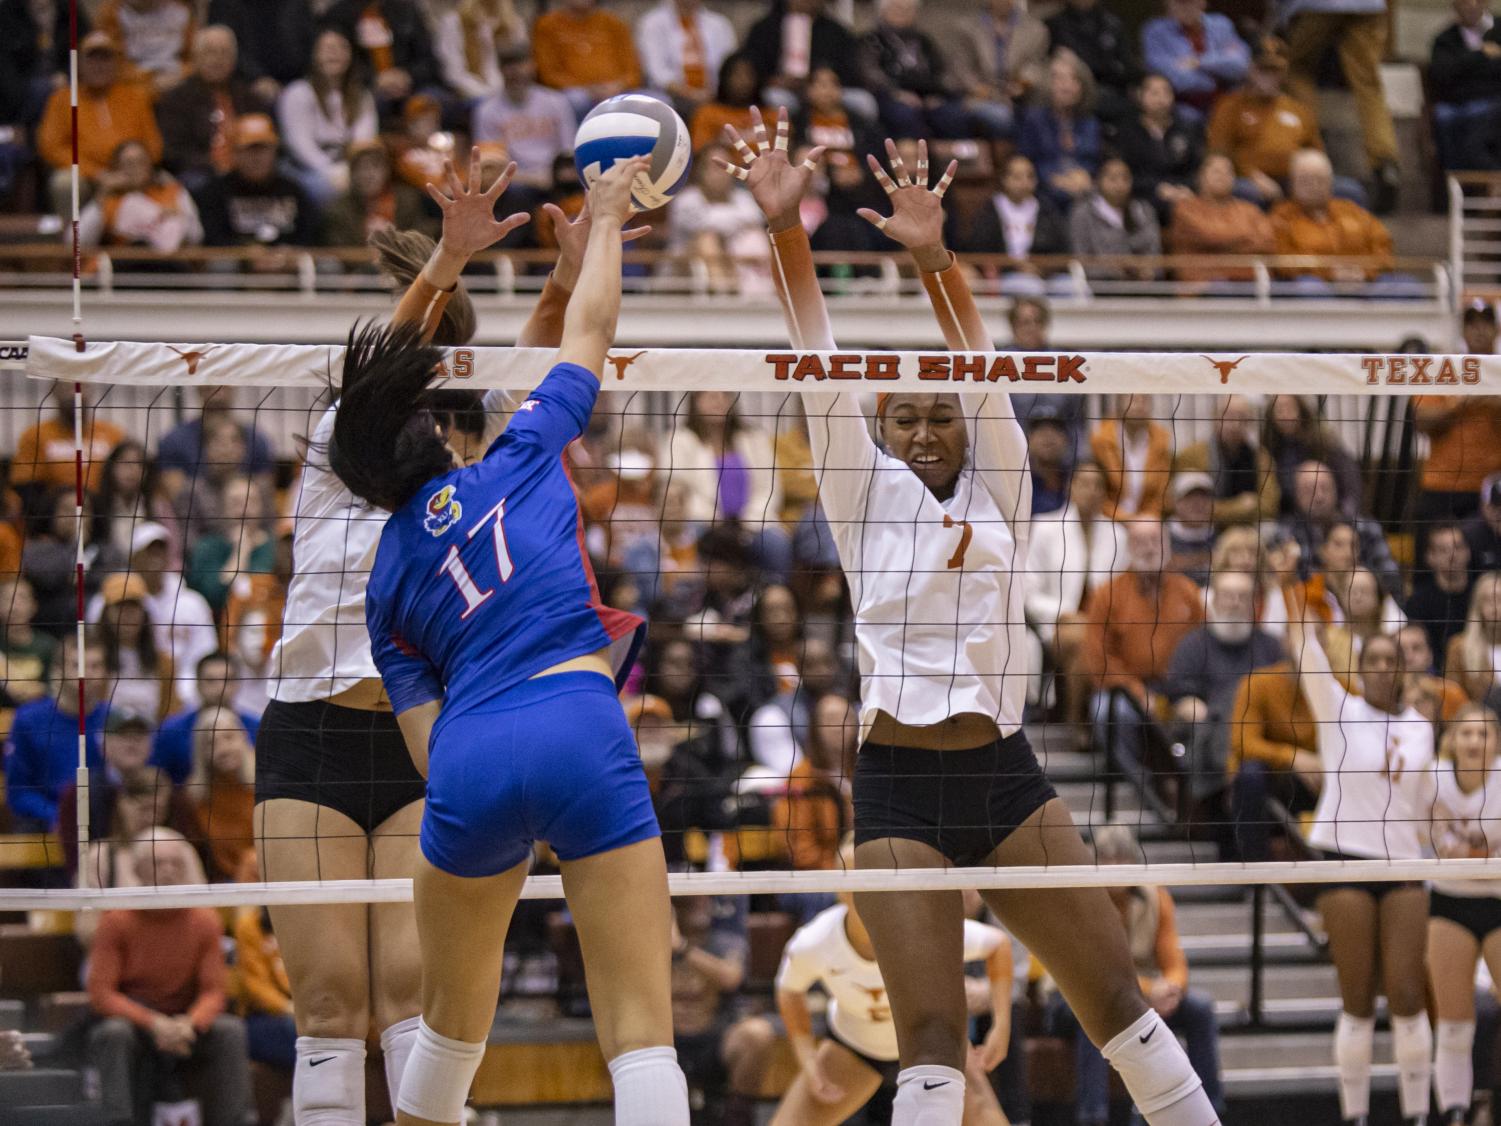 Texas volleyball sneak peek at 2023 roster reconstruction The Daily Texan